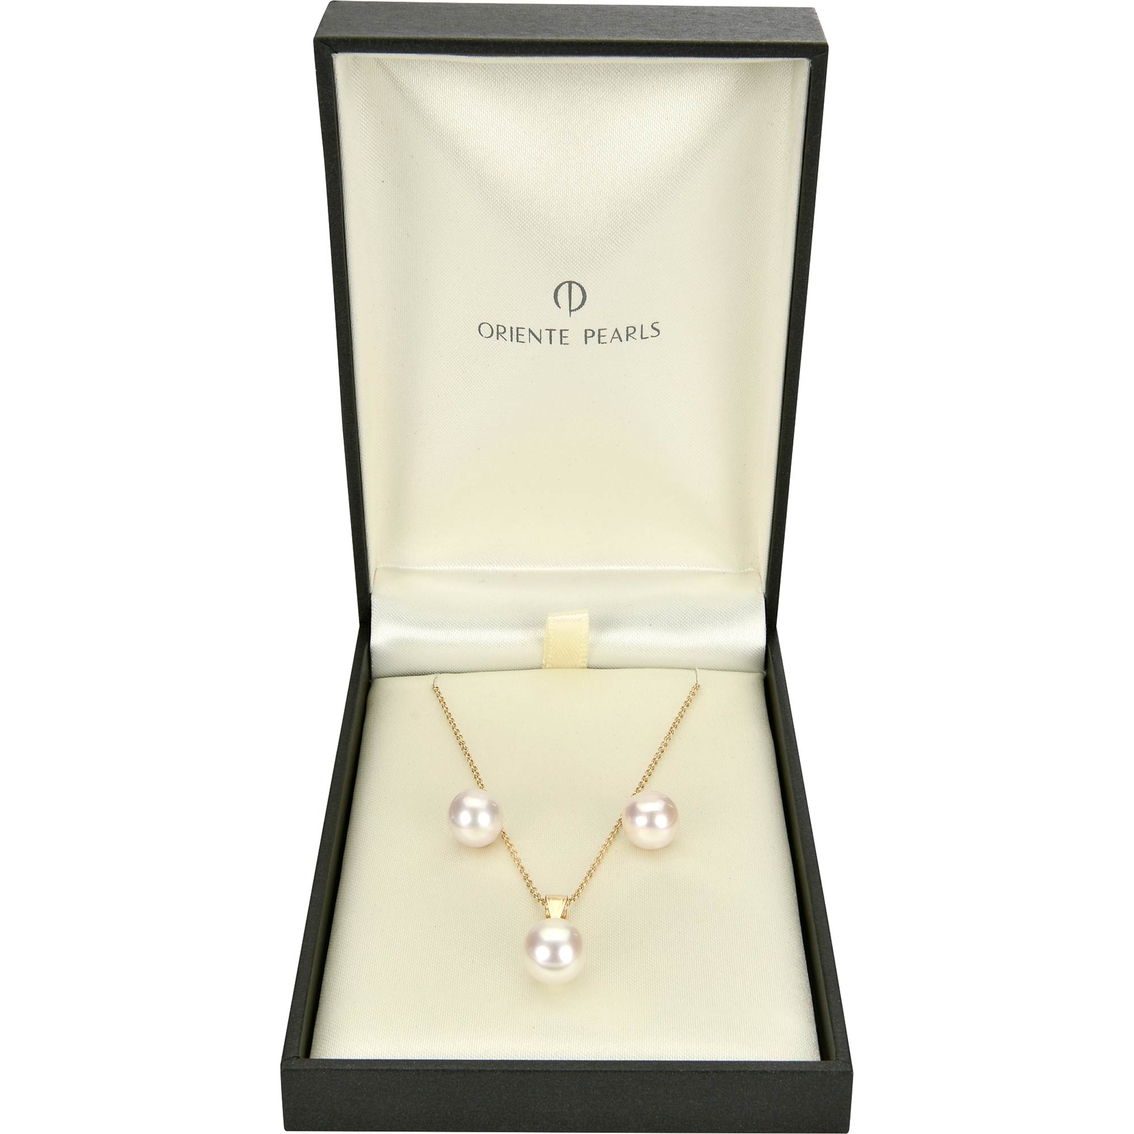 AAA Cultured Freshwater Pearl Pendant and Earrings Set - Image 2 of 2